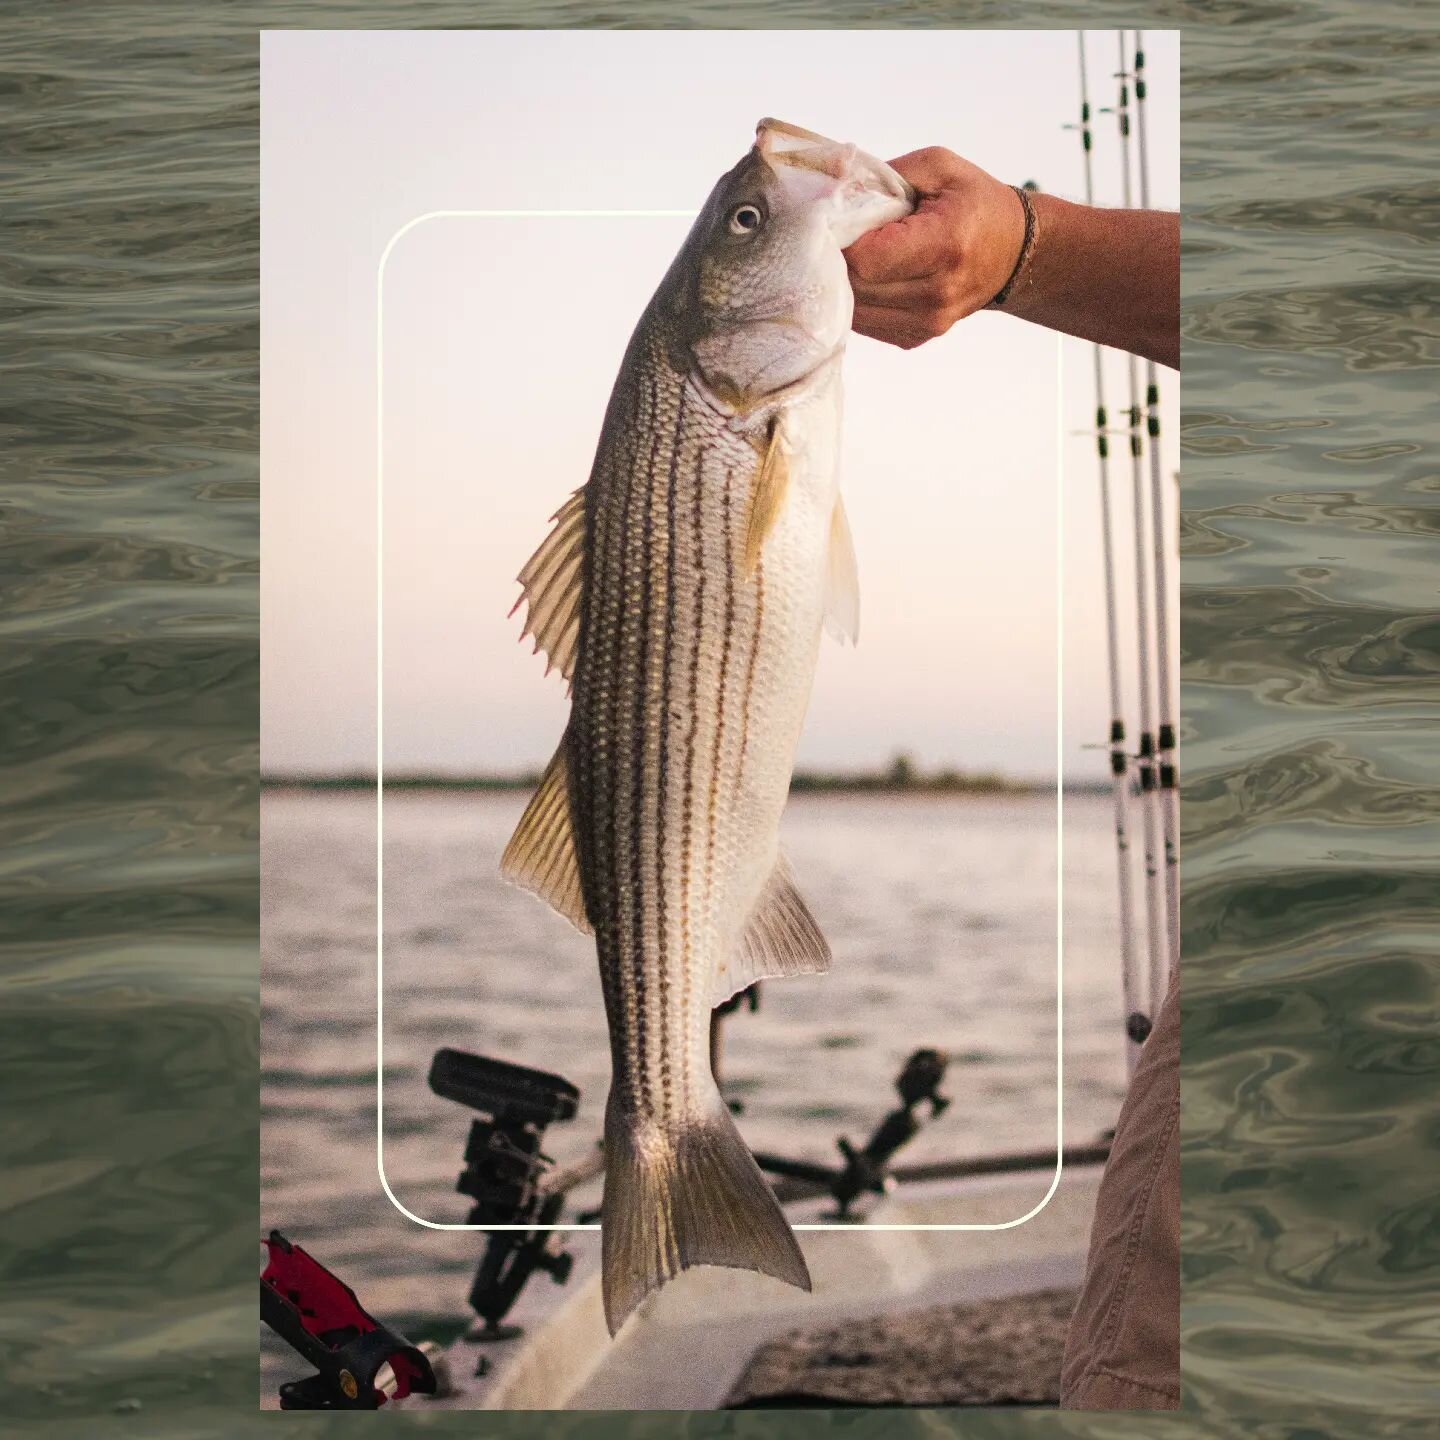 Do your weekend plans look this good? Now booking spring/summer striped bass fishing trips on Lake Texoma 🎣

(580) 352 - 4223
Goodtimesfishingco.com

#GoodTimesFishingCo #LakeTexoma #OklahomaFishing #OklahomaFishingTrail #OklahomaStateParks #Fishing